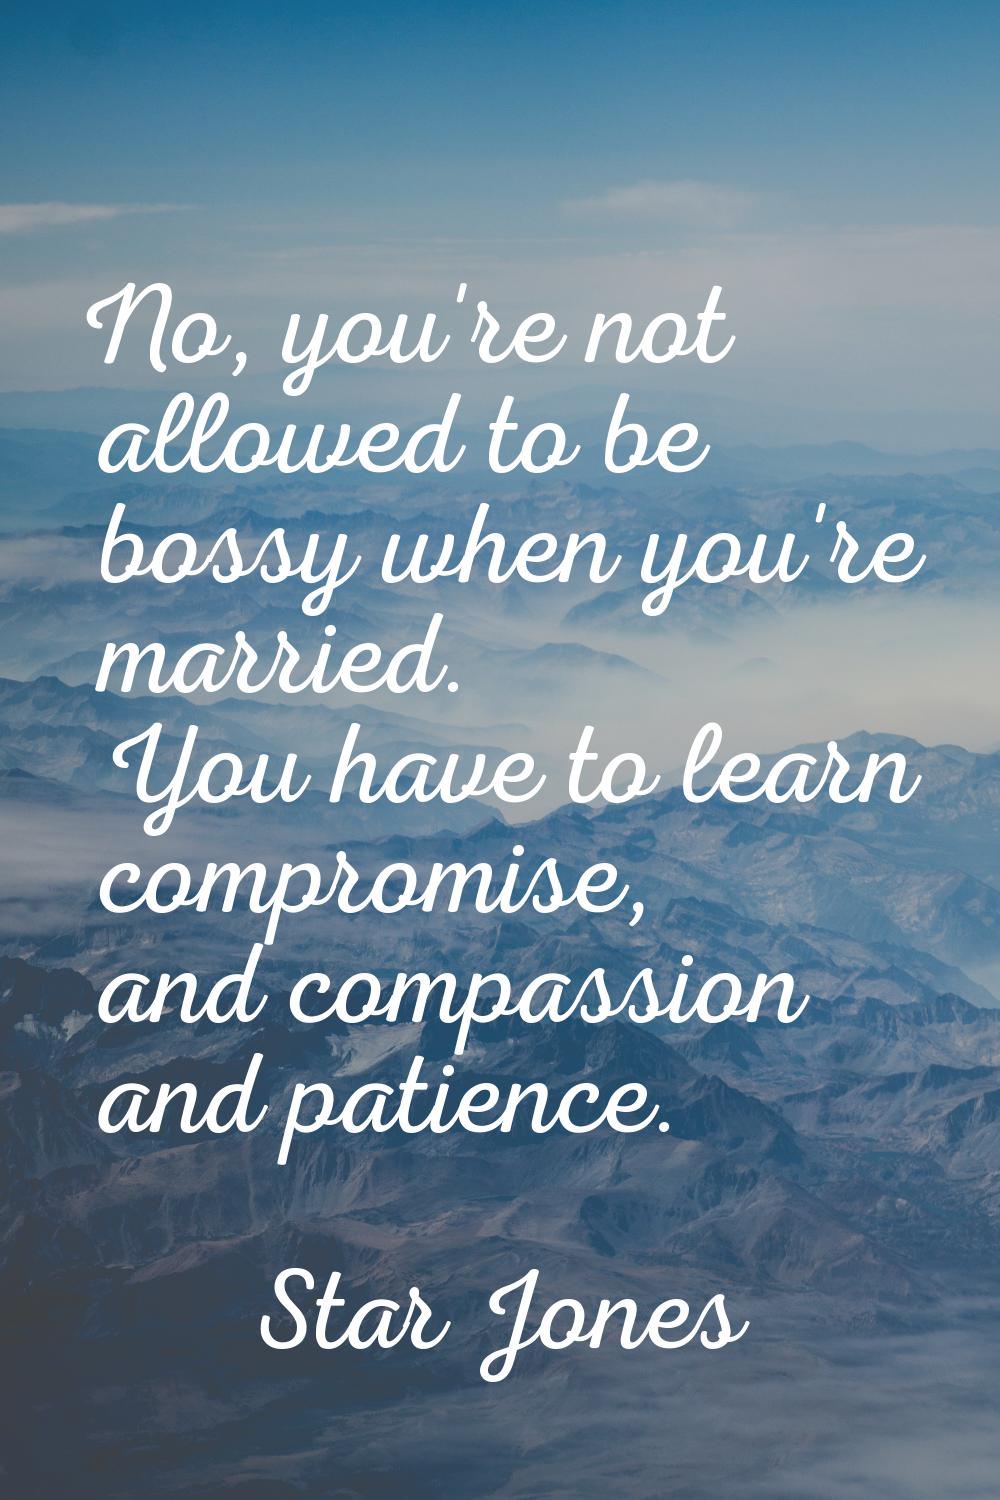 No, you're not allowed to be bossy when you're married. You have to learn compromise, and compassio